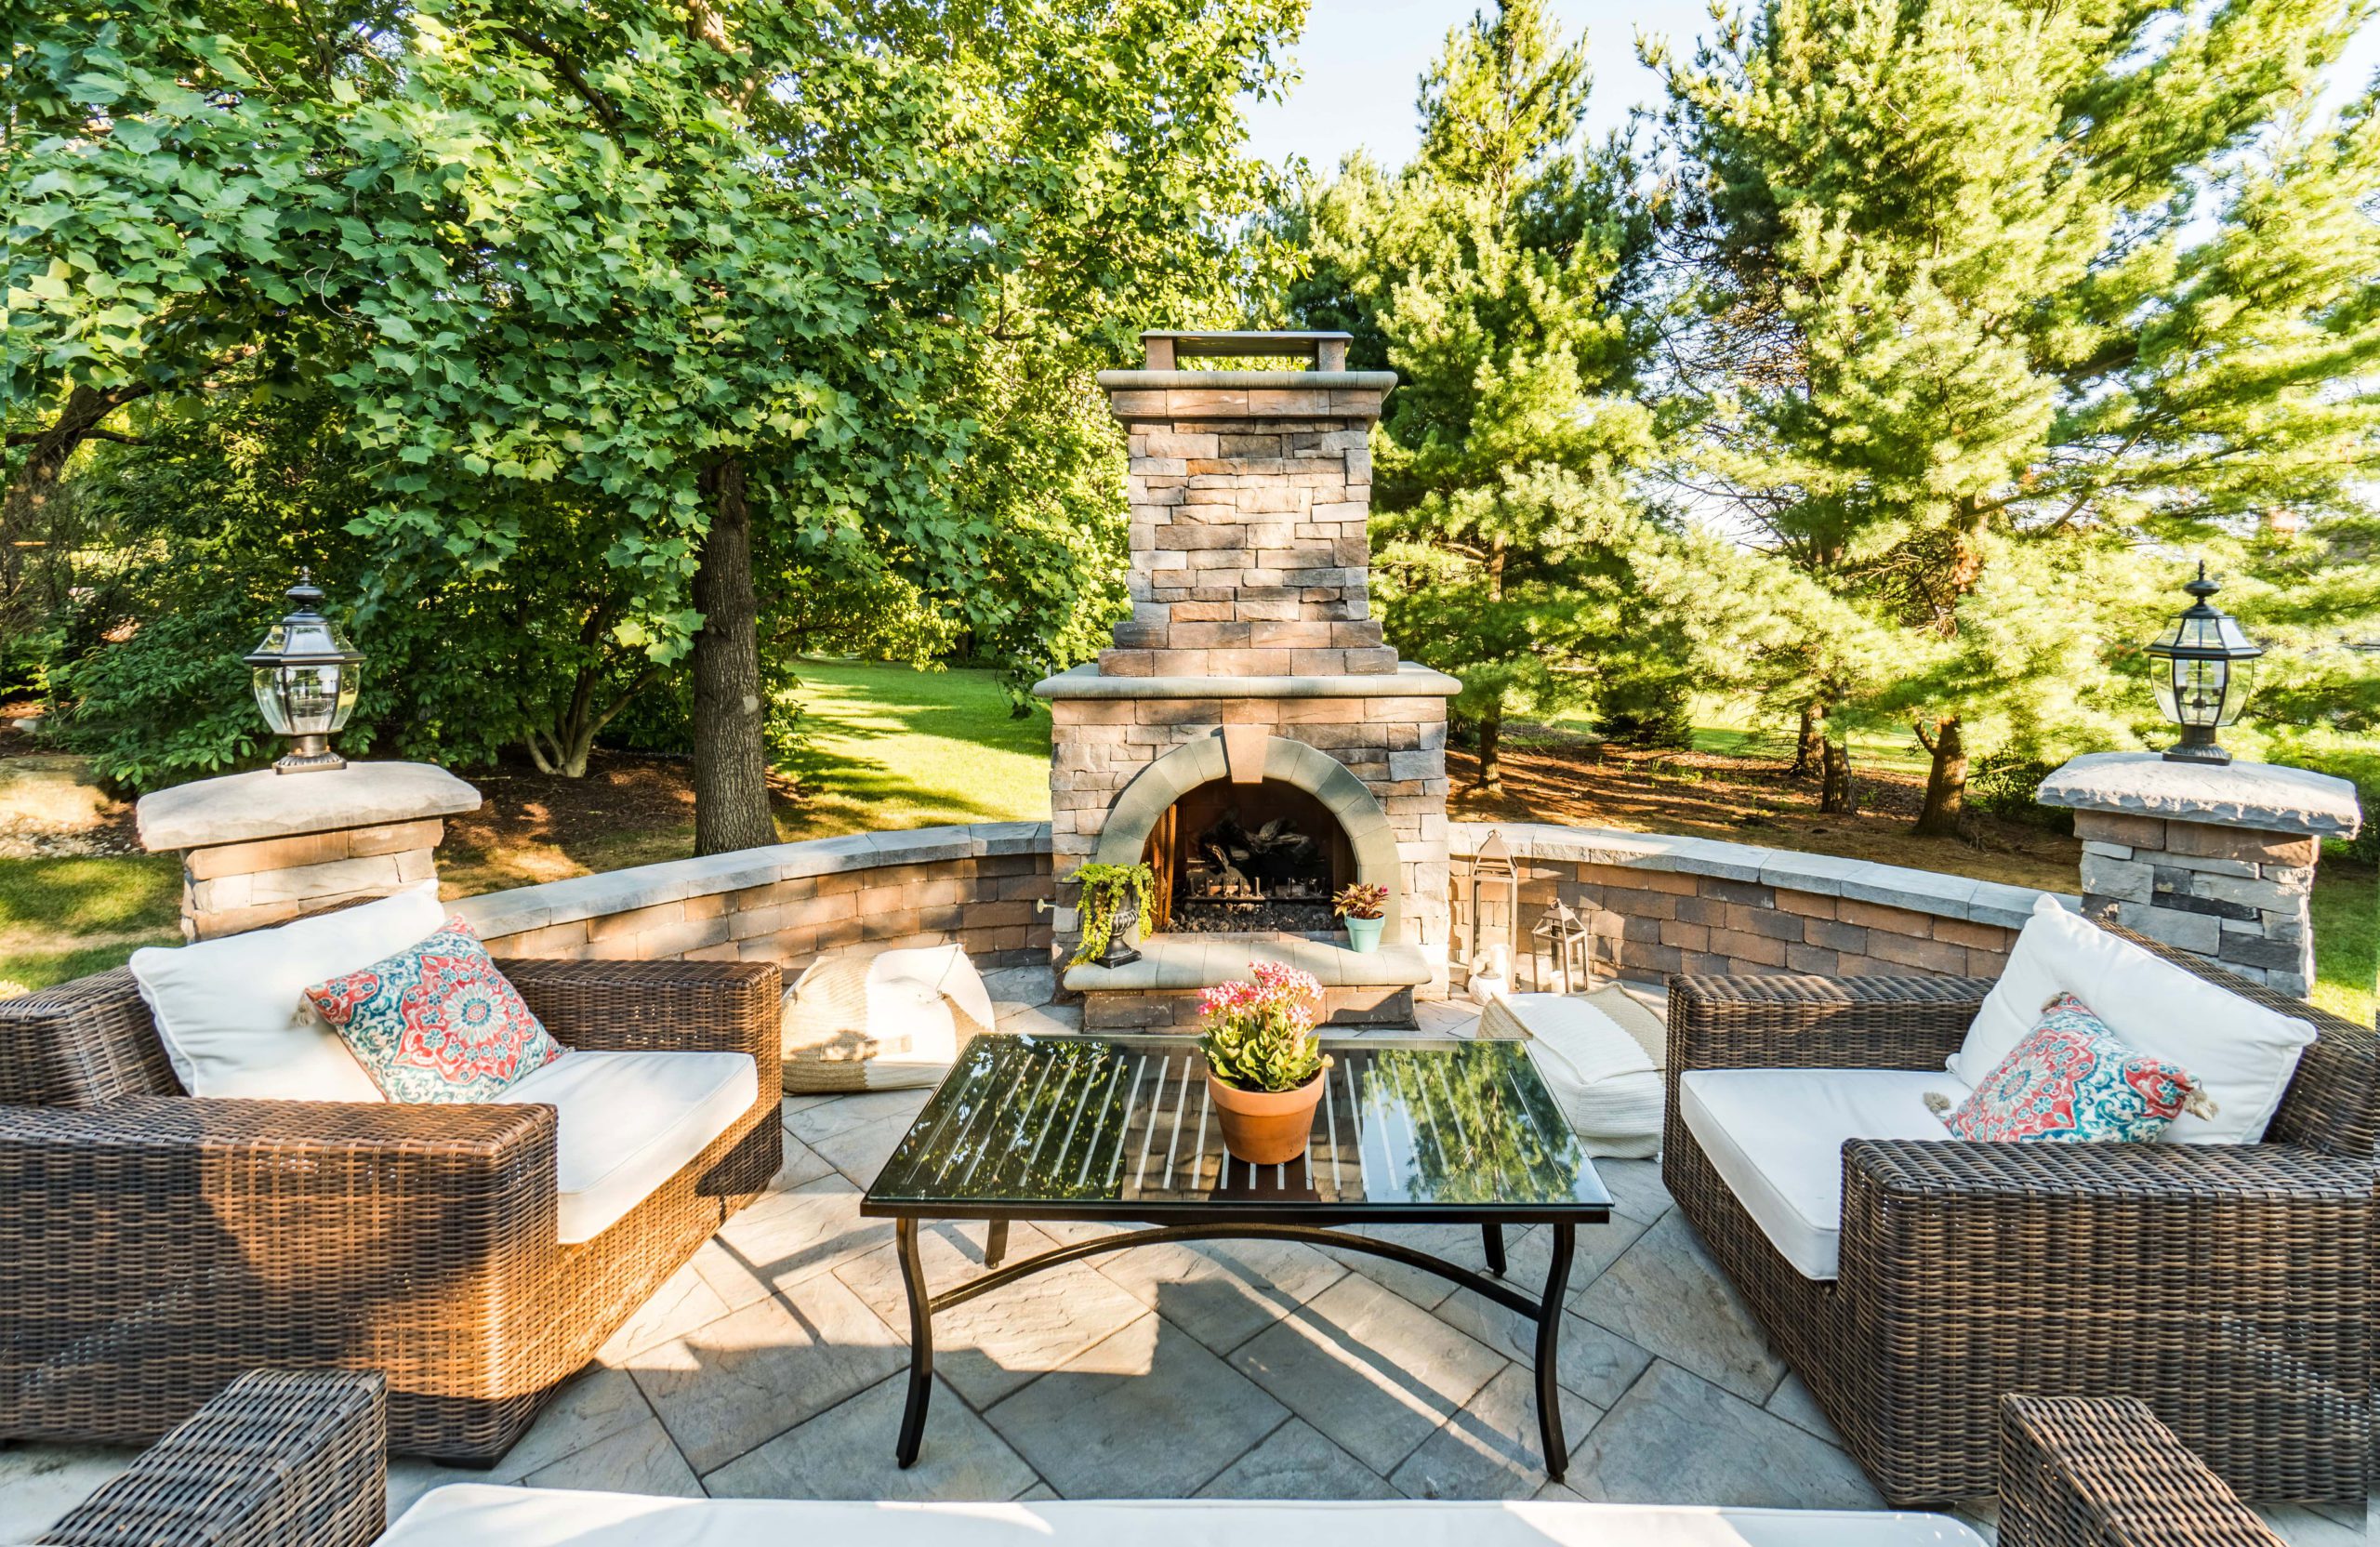 FIREPLACES & FIREPITS 2